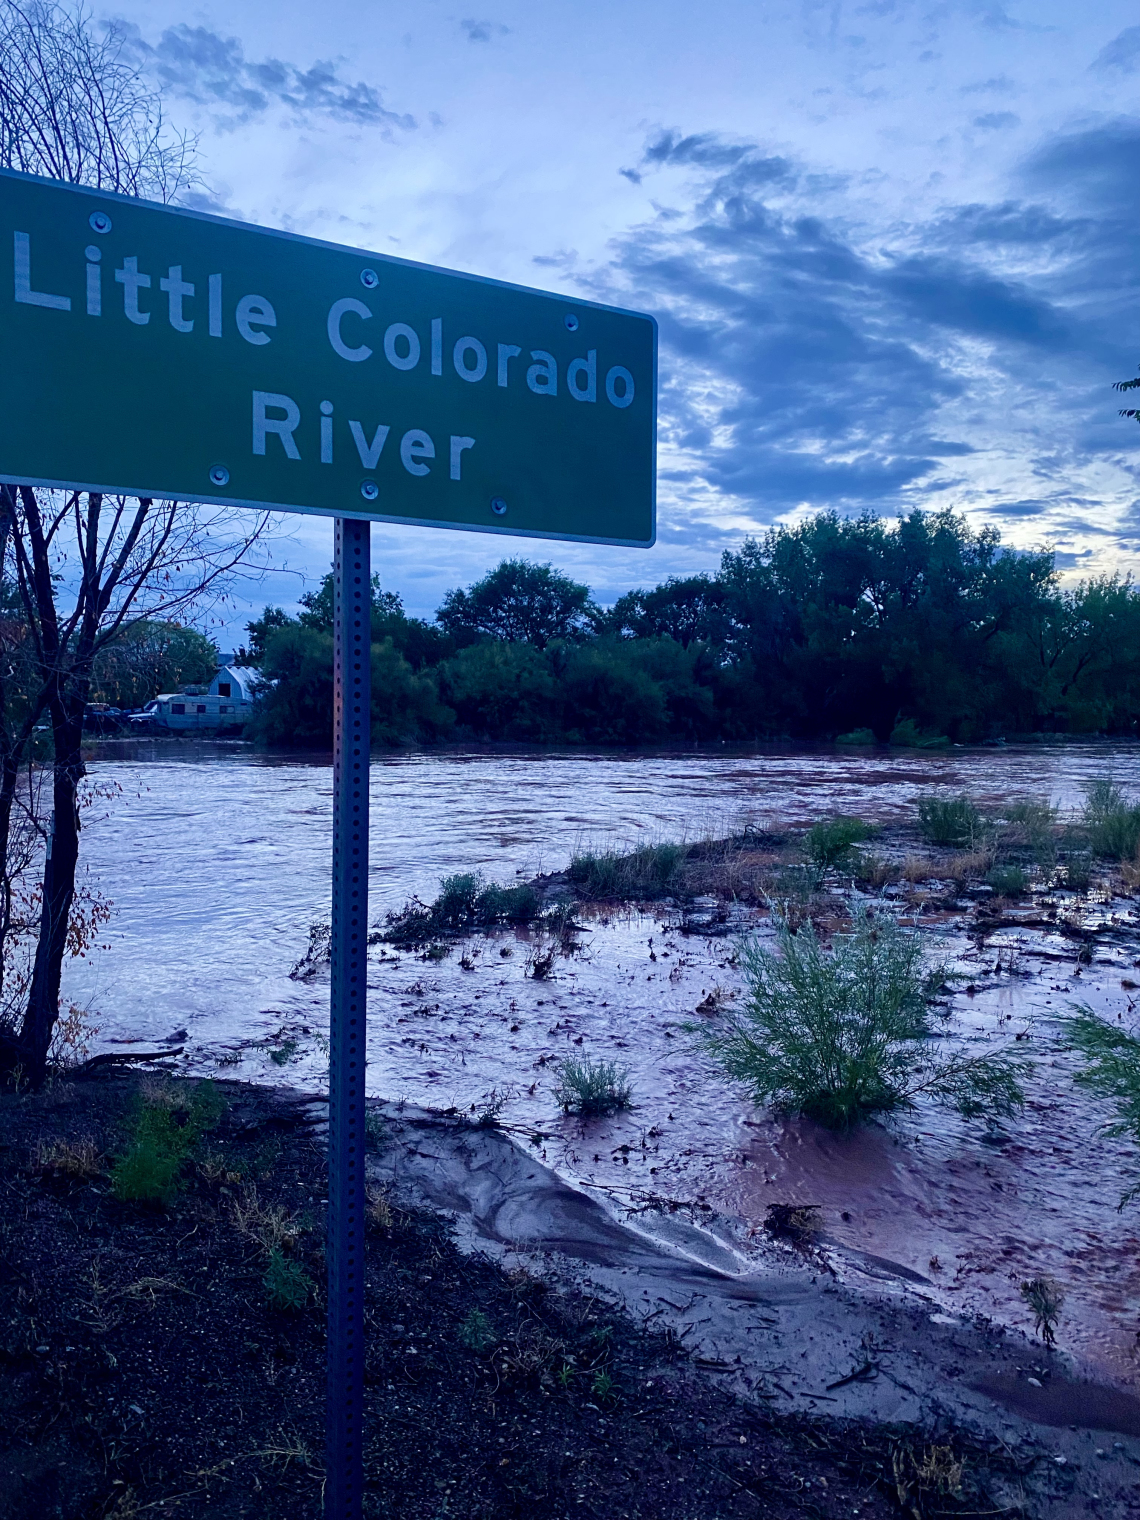 Holly Winters photo showing flooding on the little colorado river